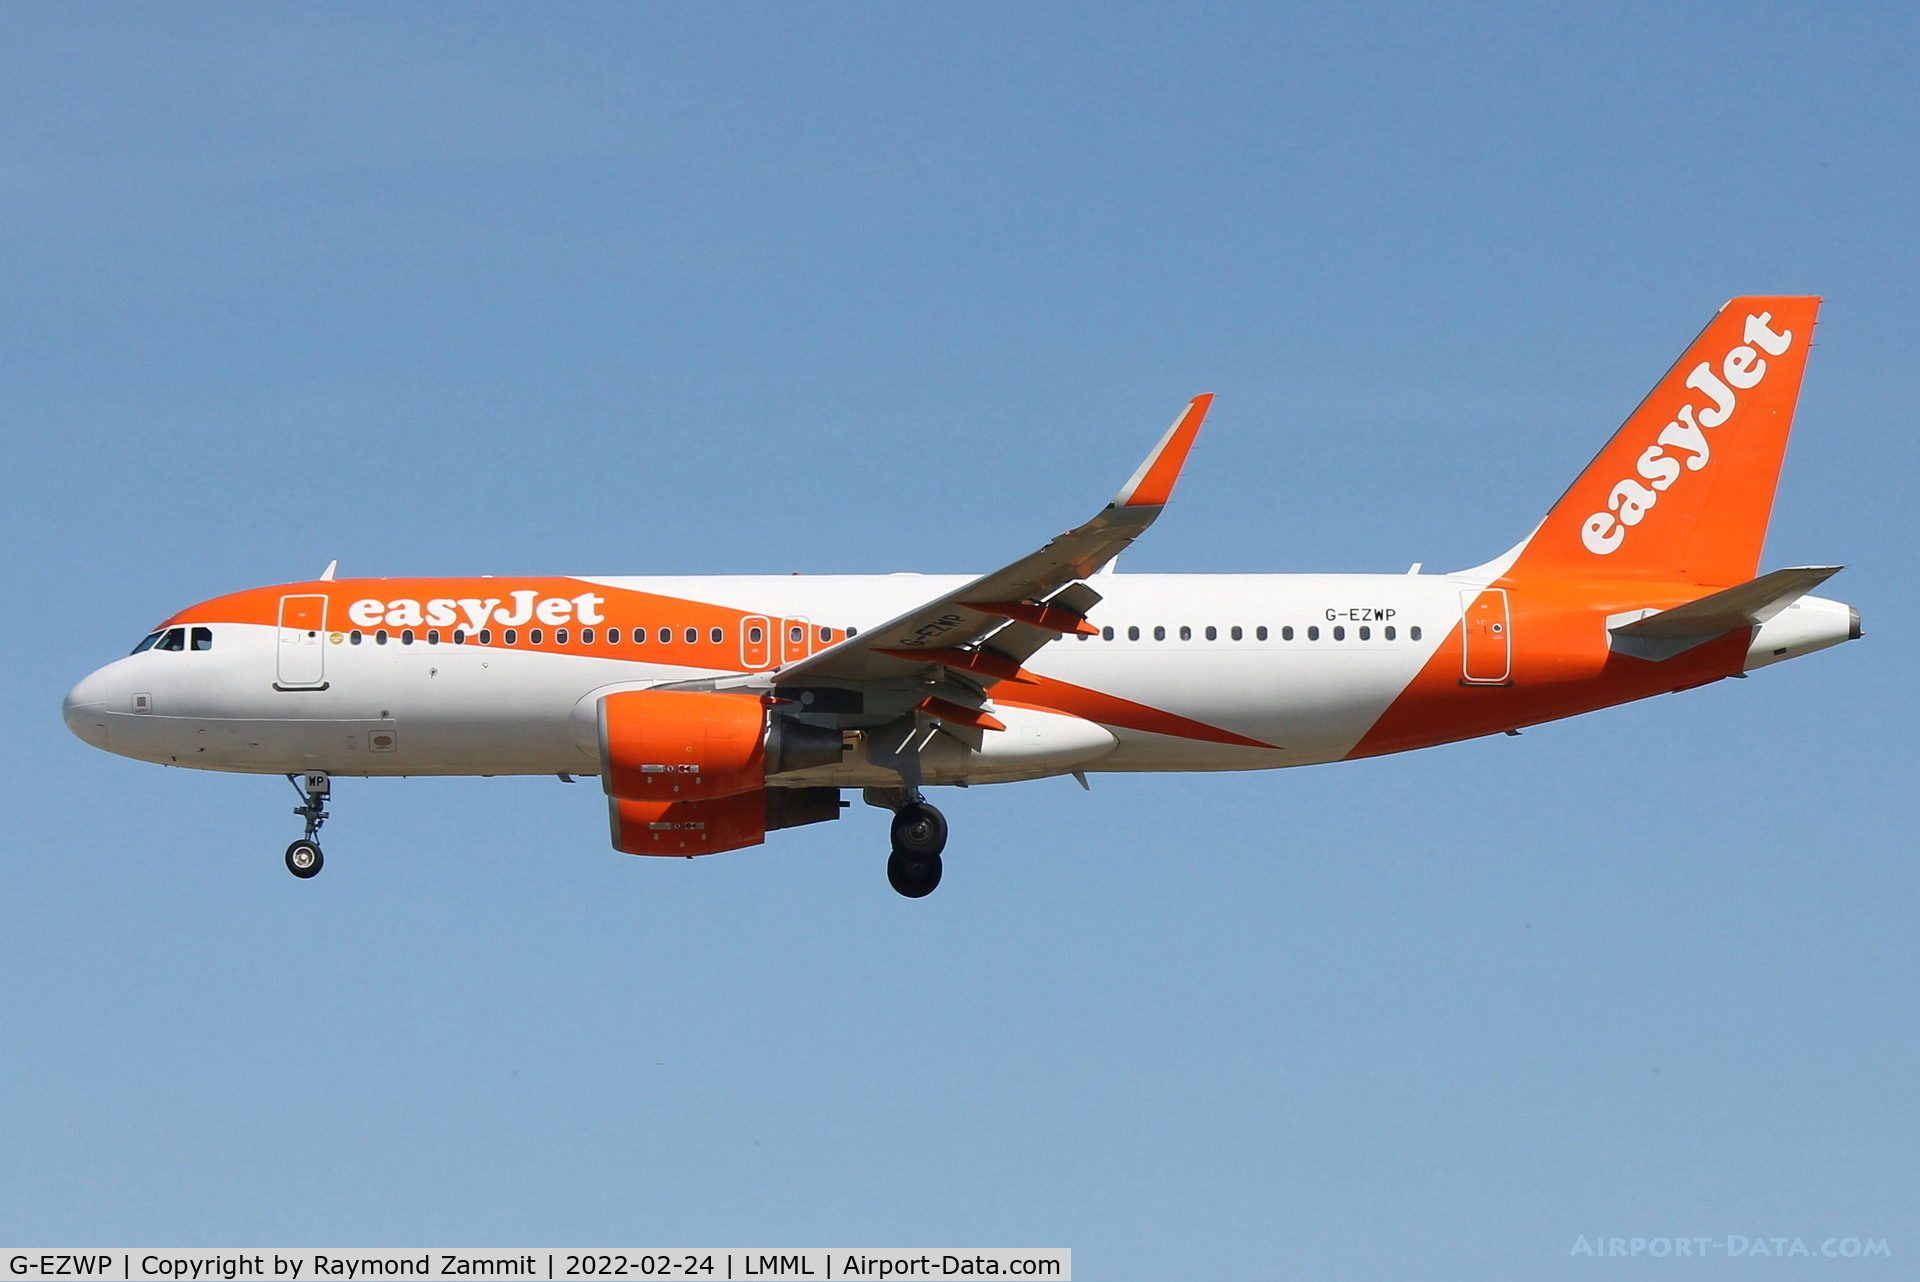 G-EZWP, 2013 Airbus A320-214 C/N 5927, A320 G-EZWP Easyjet